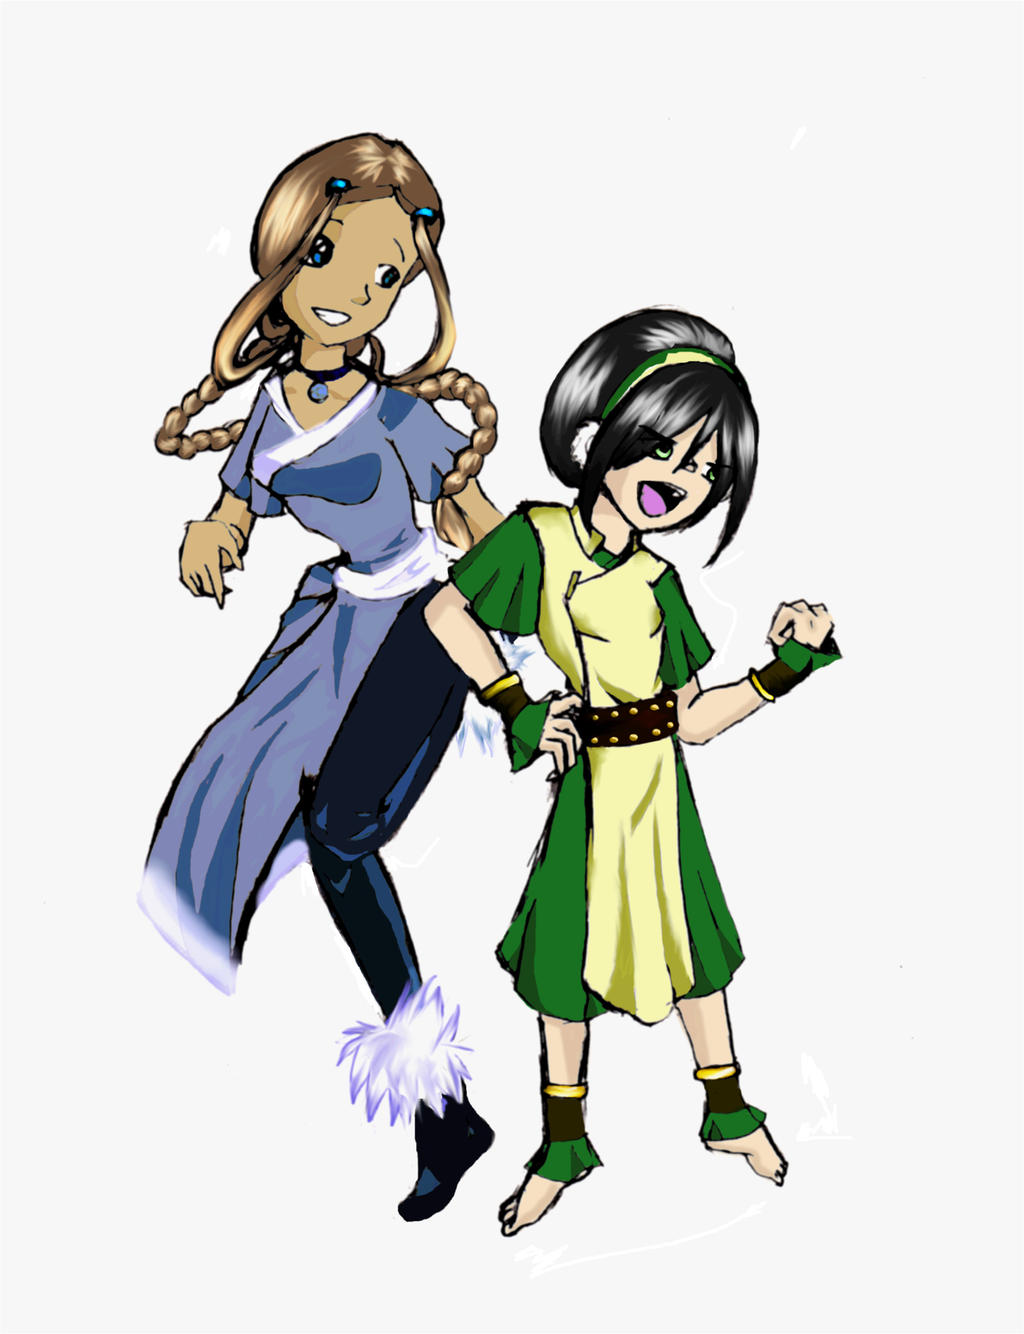 Toph and Katara Masters Dance by mr35mm on DeviantArt